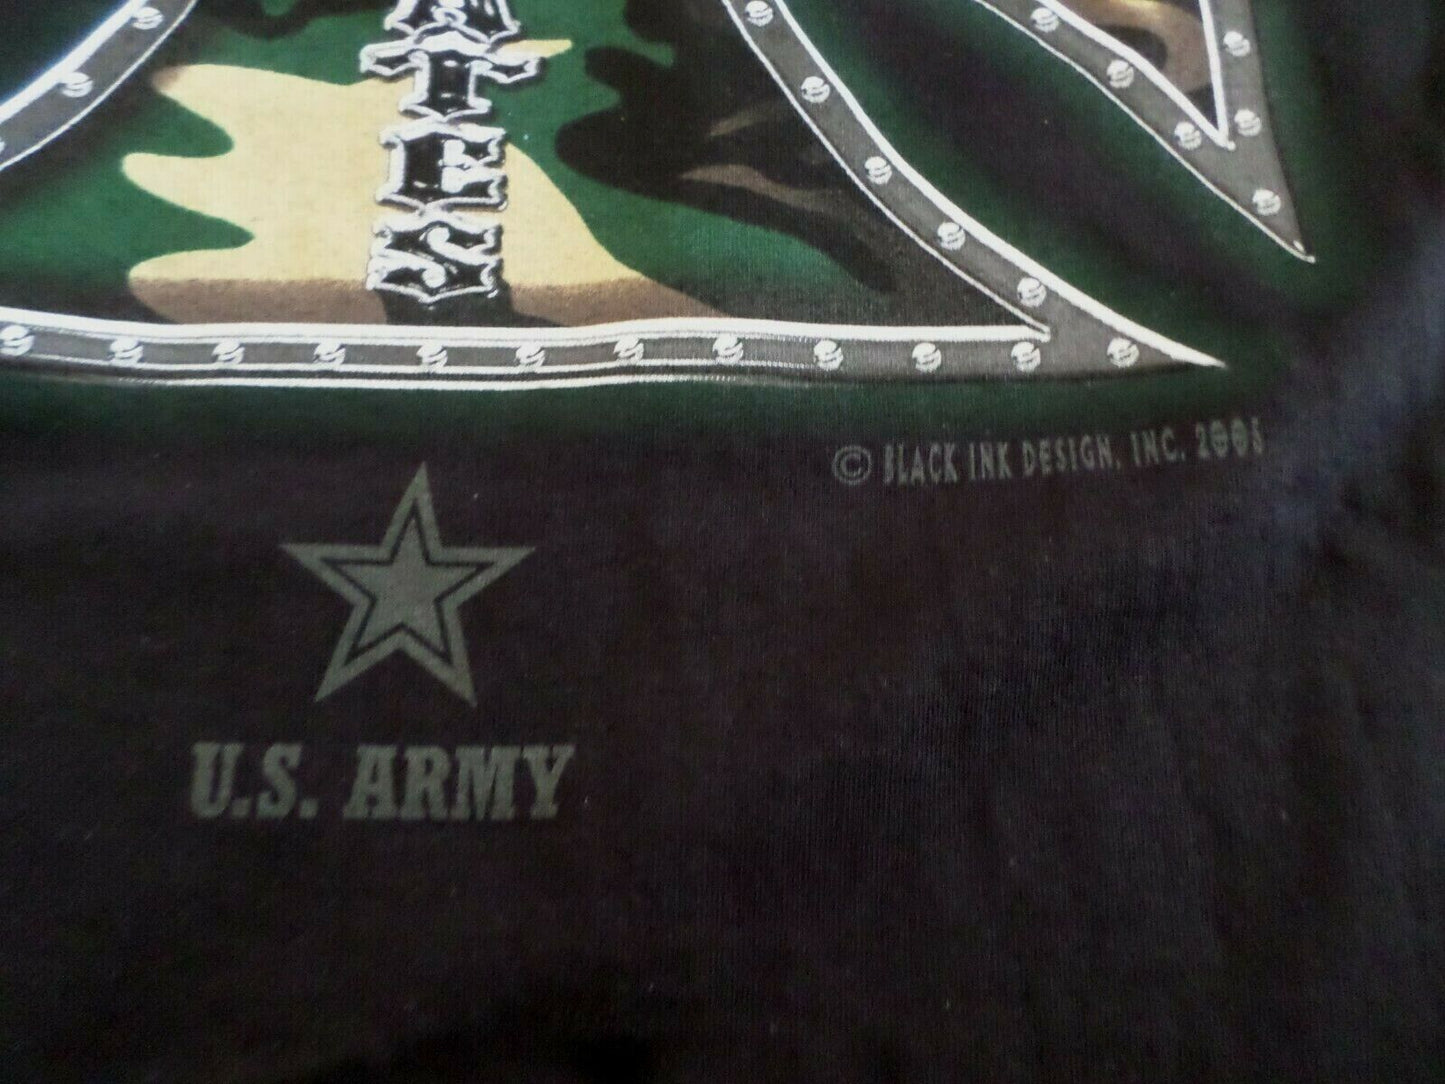 U.S MILITARY ARMY T- SHIRT IRON CROSS MADE IN THE USA BLACK INK DESIGN X-LARGE